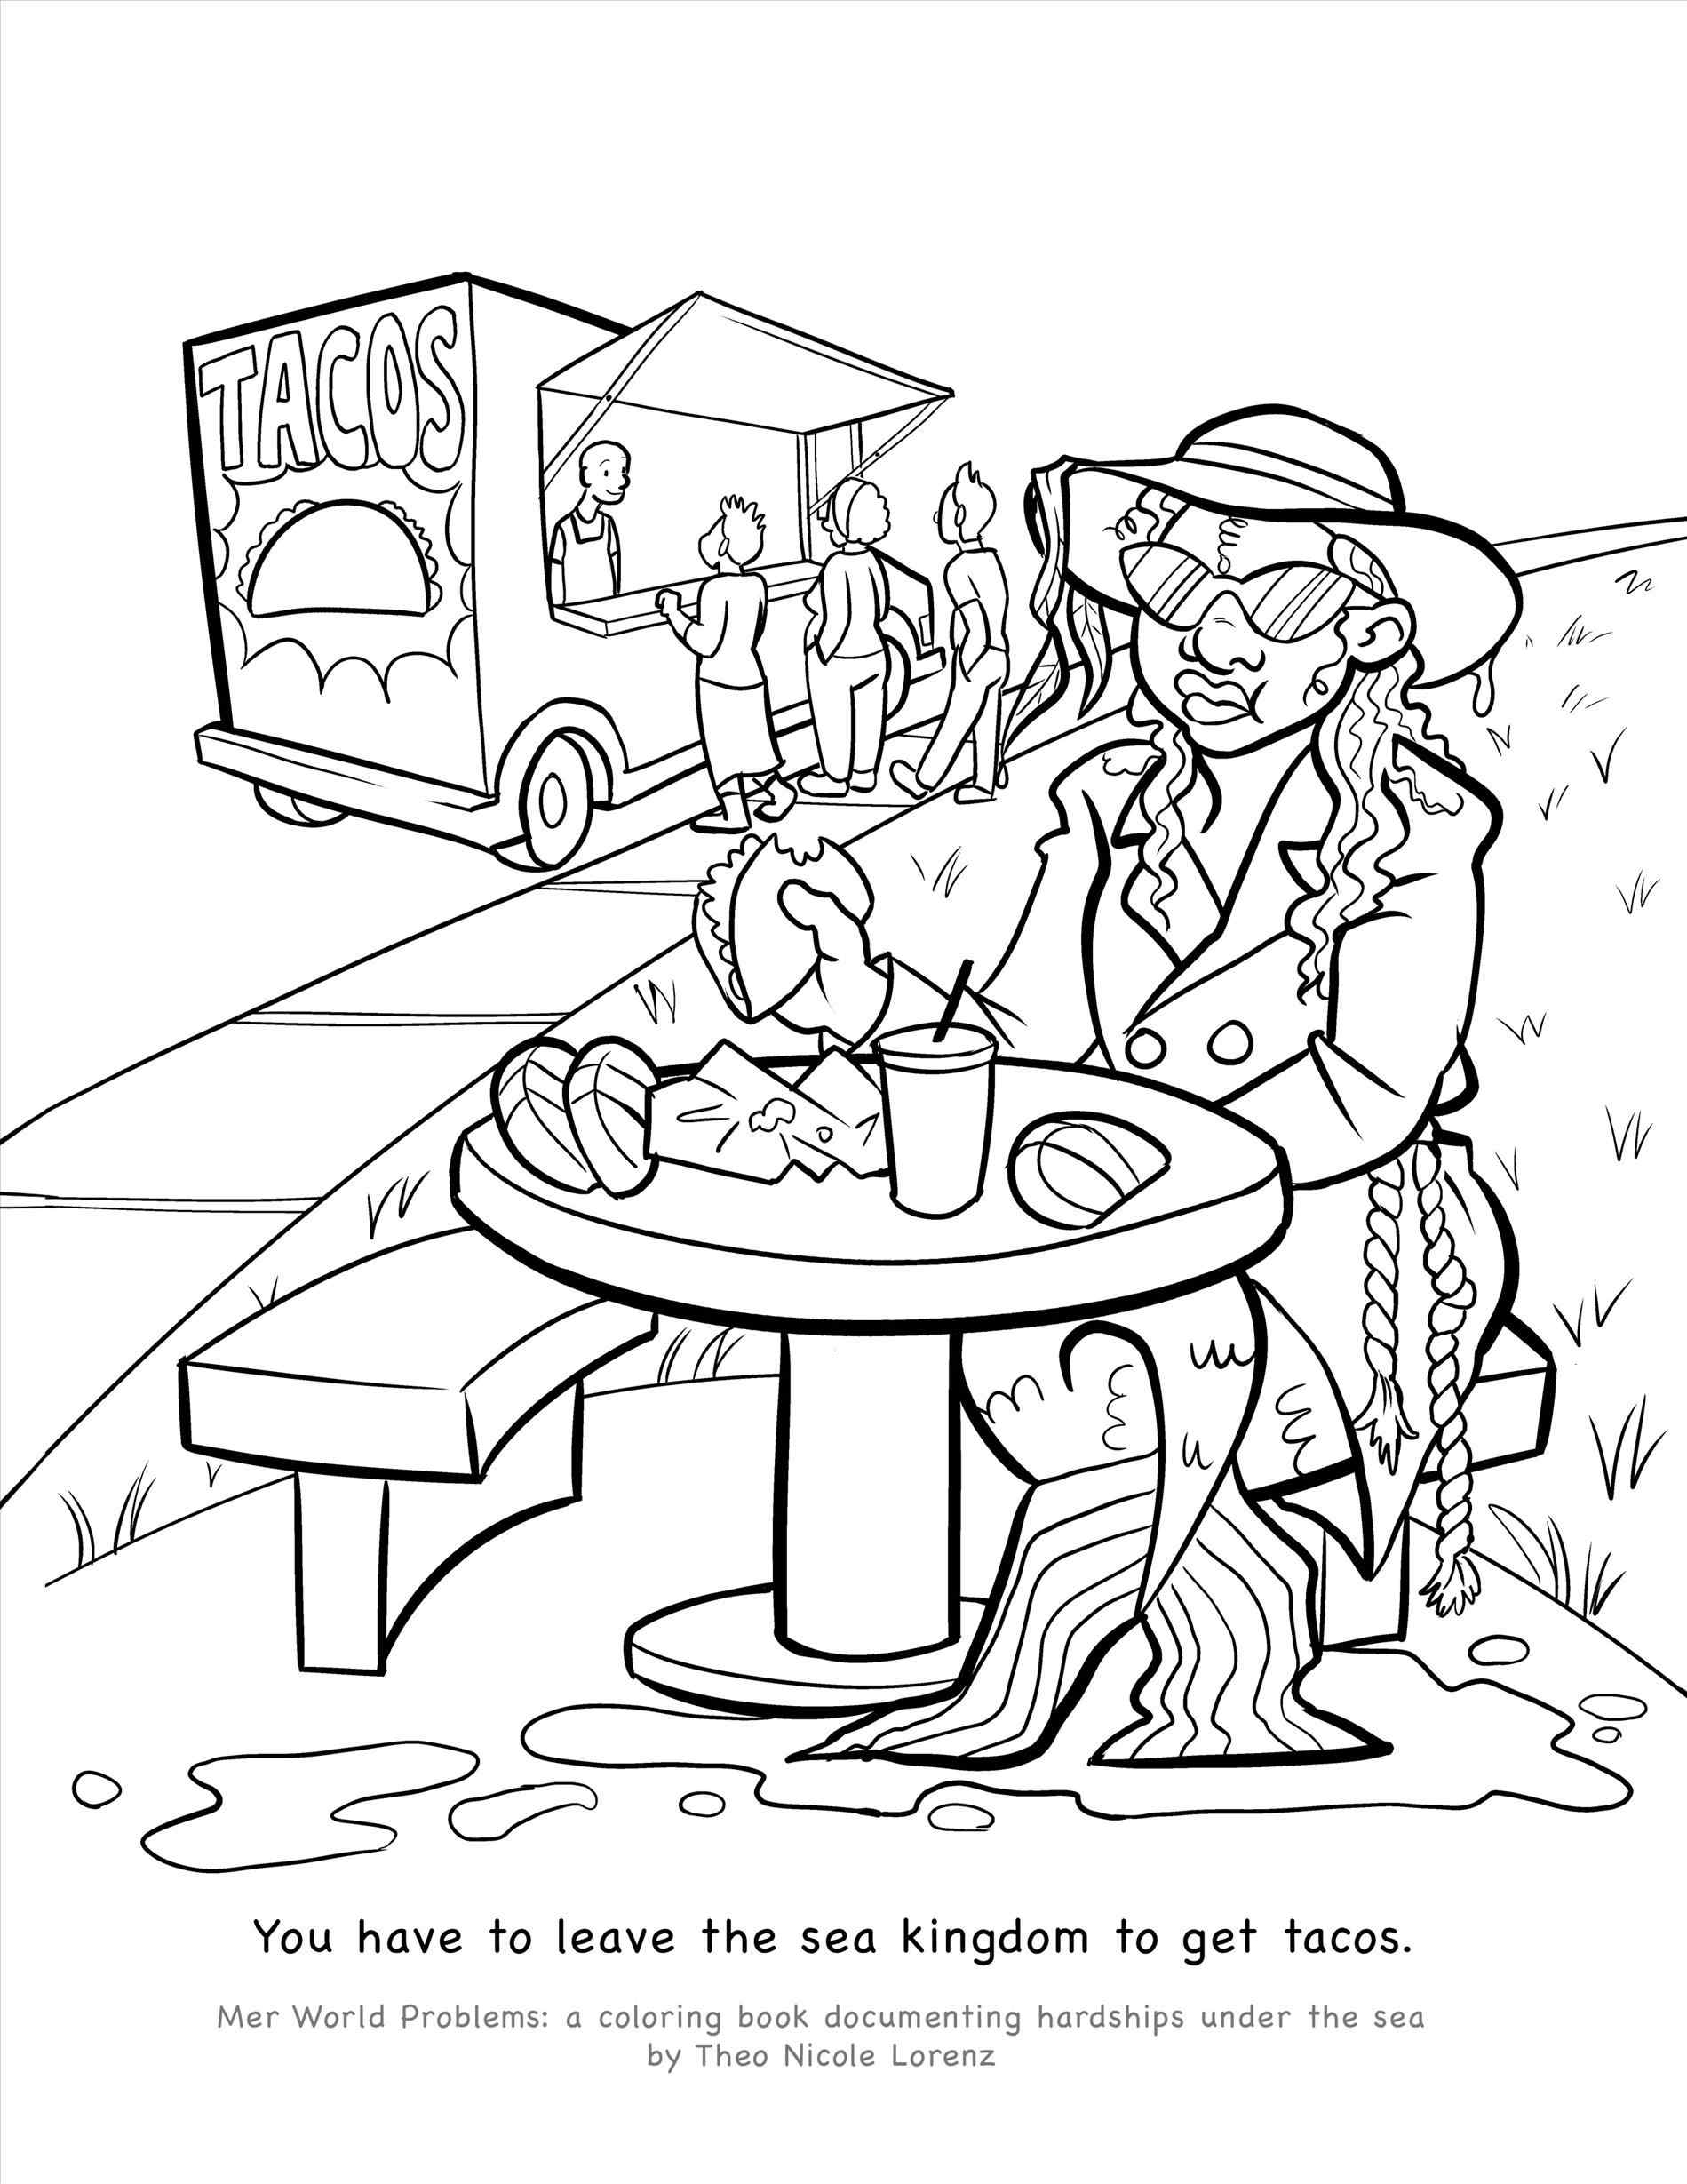 tundra coloring pages toyota tundra coloring pages at getcoloringscom free tundra pages coloring 